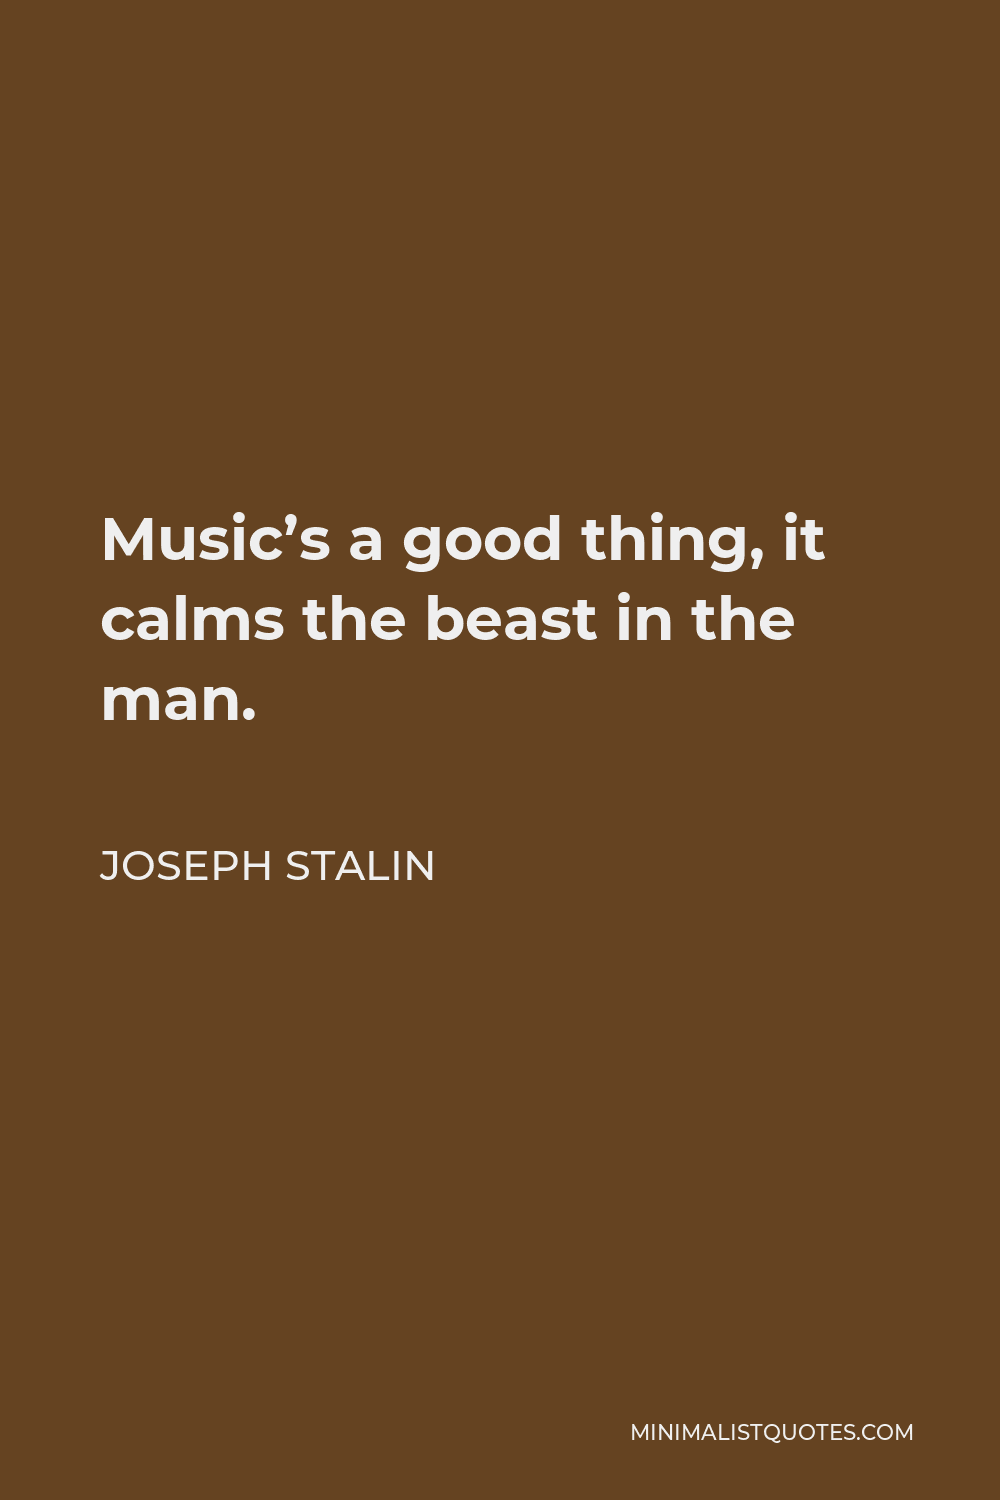 Joseph Stalin Quote - Music’s a good thing, it calms the beast in the man.